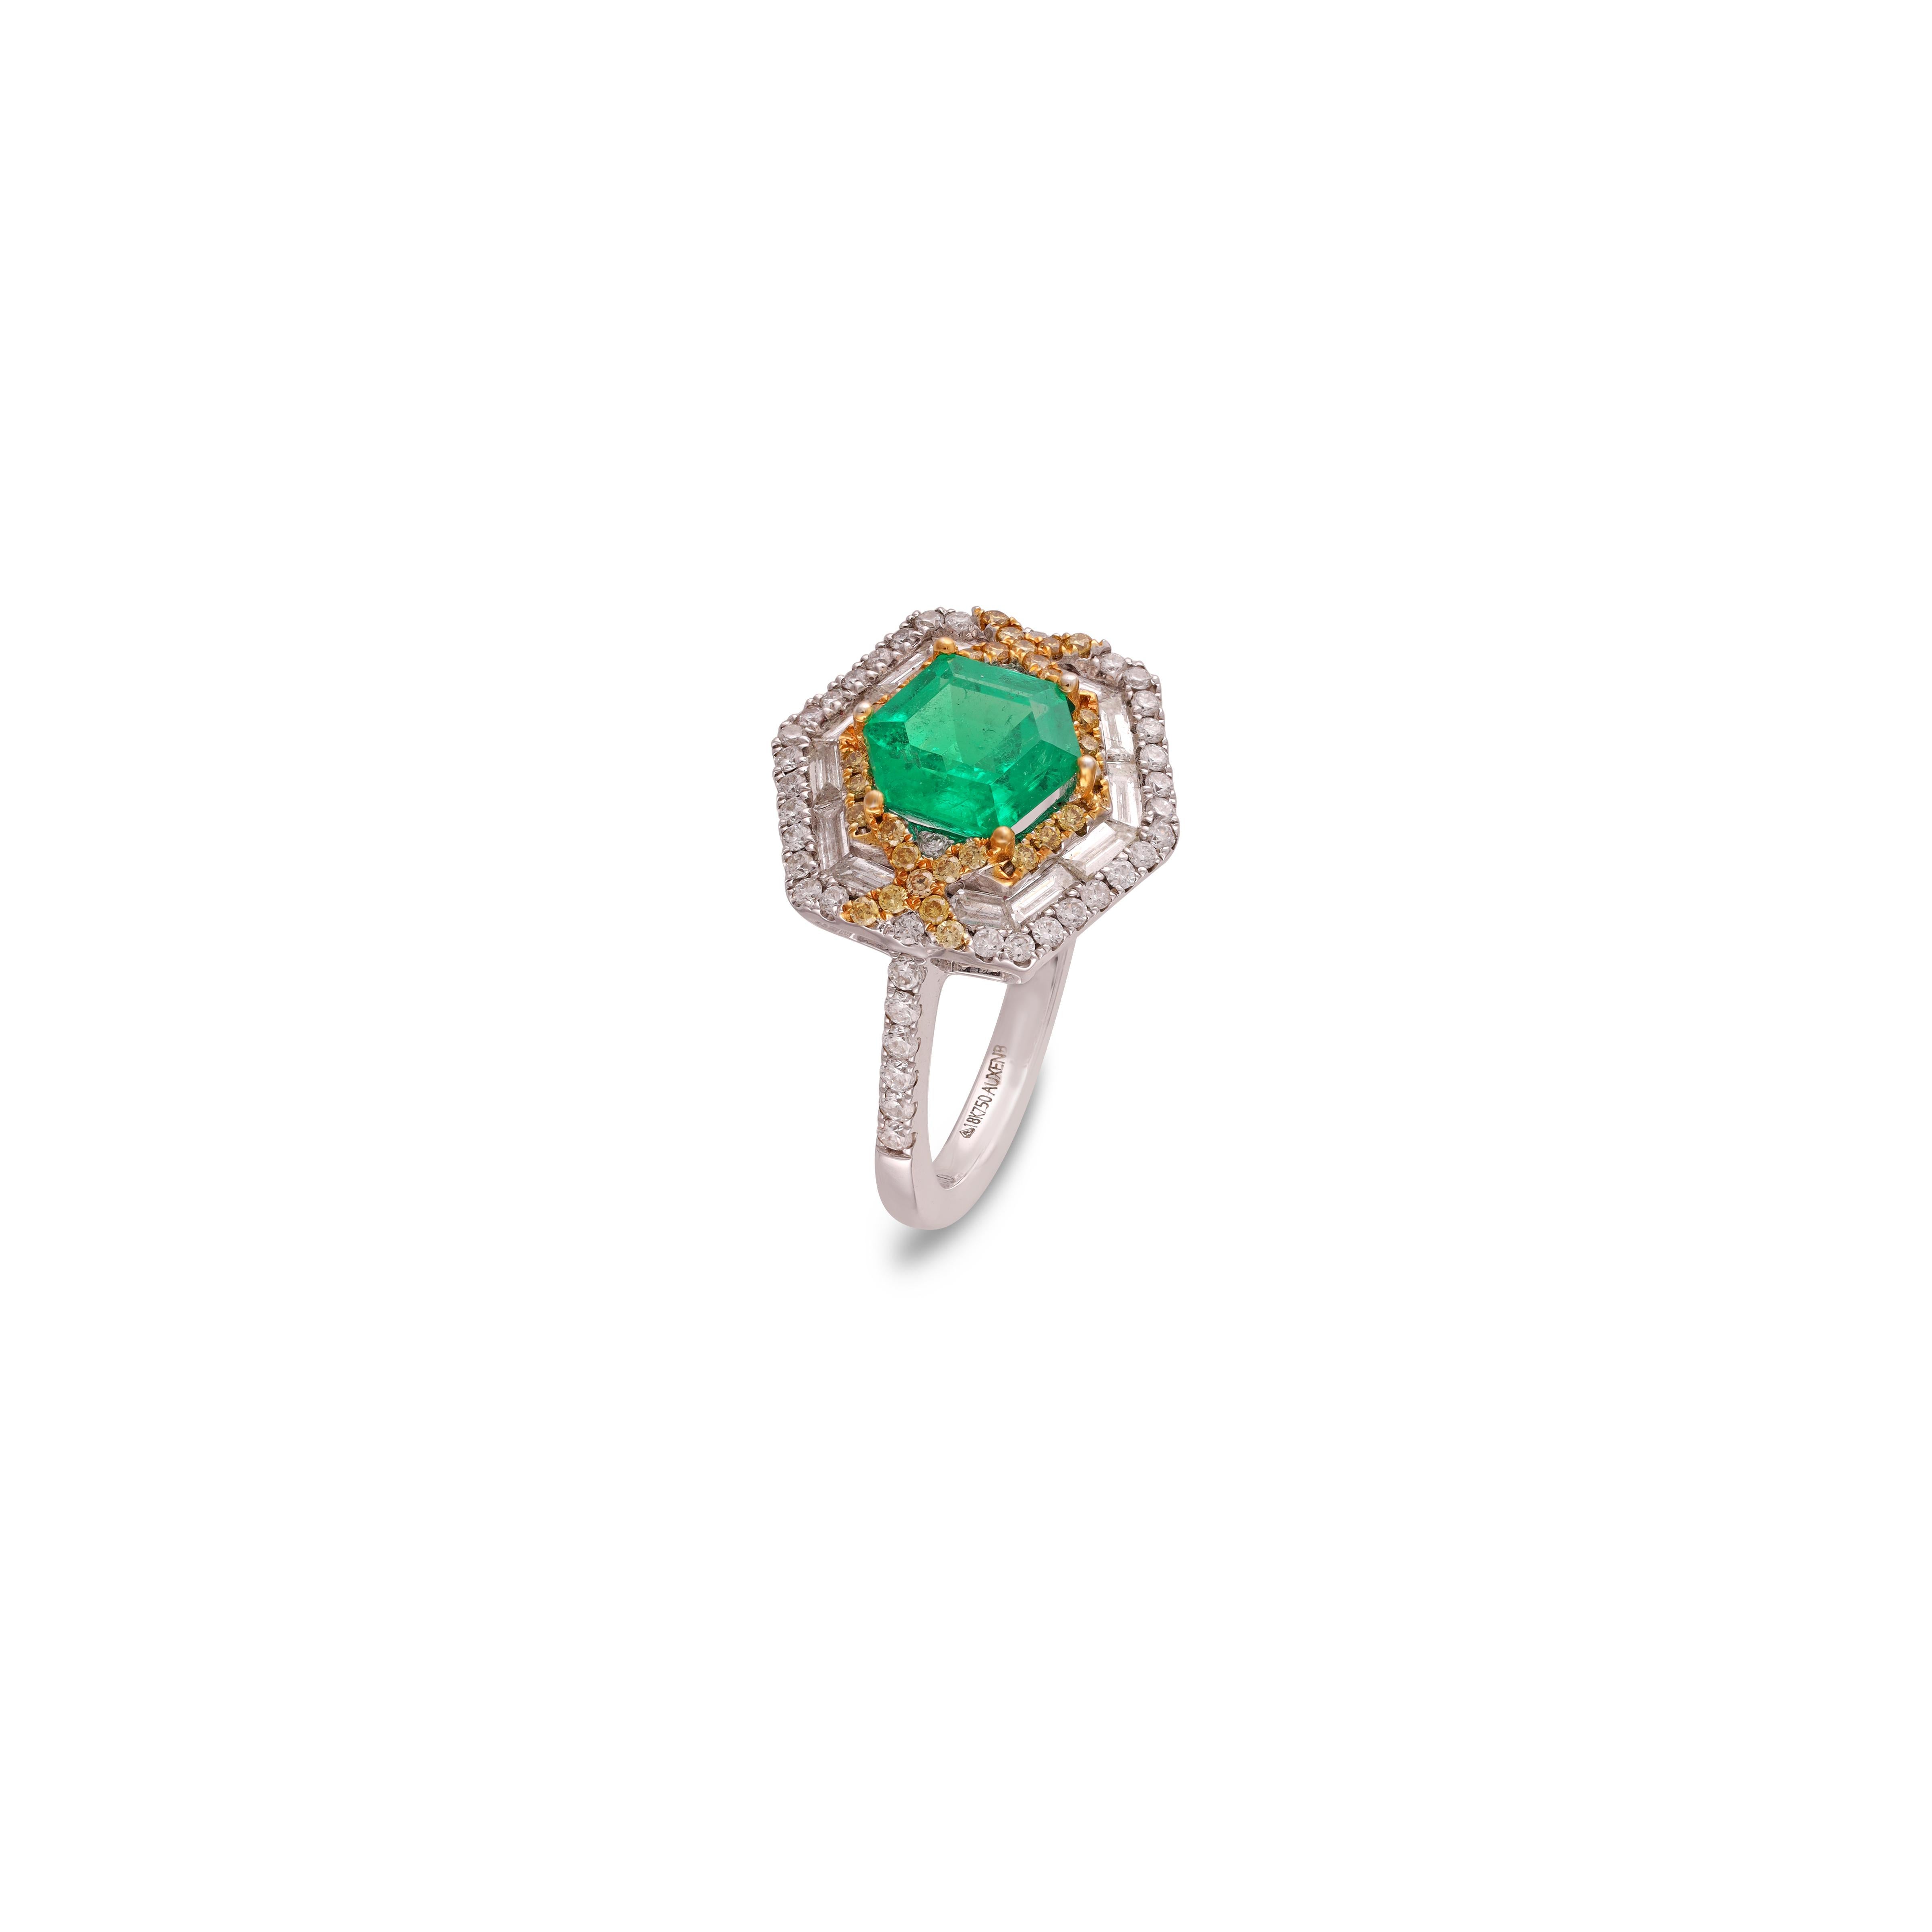 Contemporary 1.47 Carat Clear Zambian Emerald & Fancy Diamond Cluster Ring in 18K White Gold For Sale